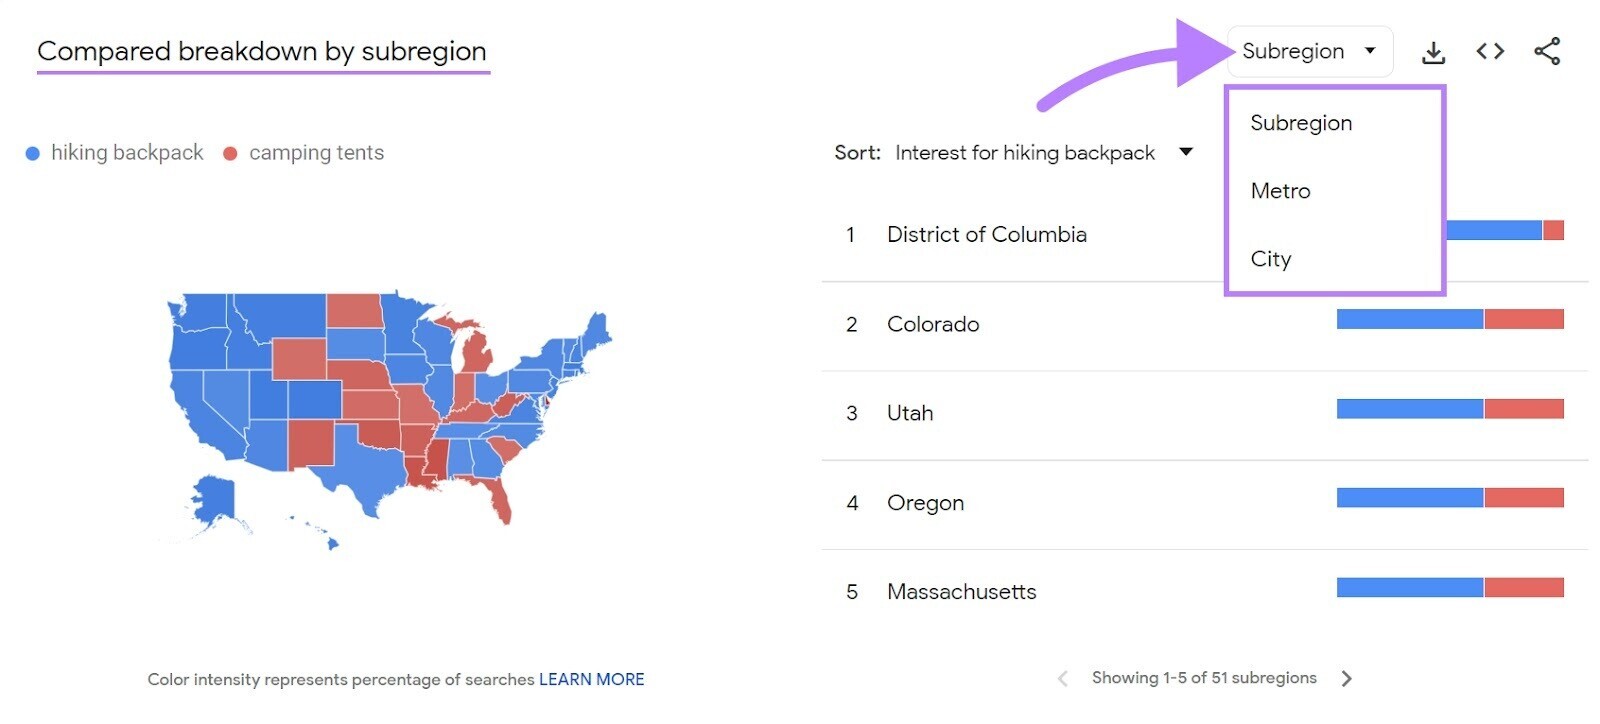 Compared breakdown by region results for “hiking backpack” and “camping tents”